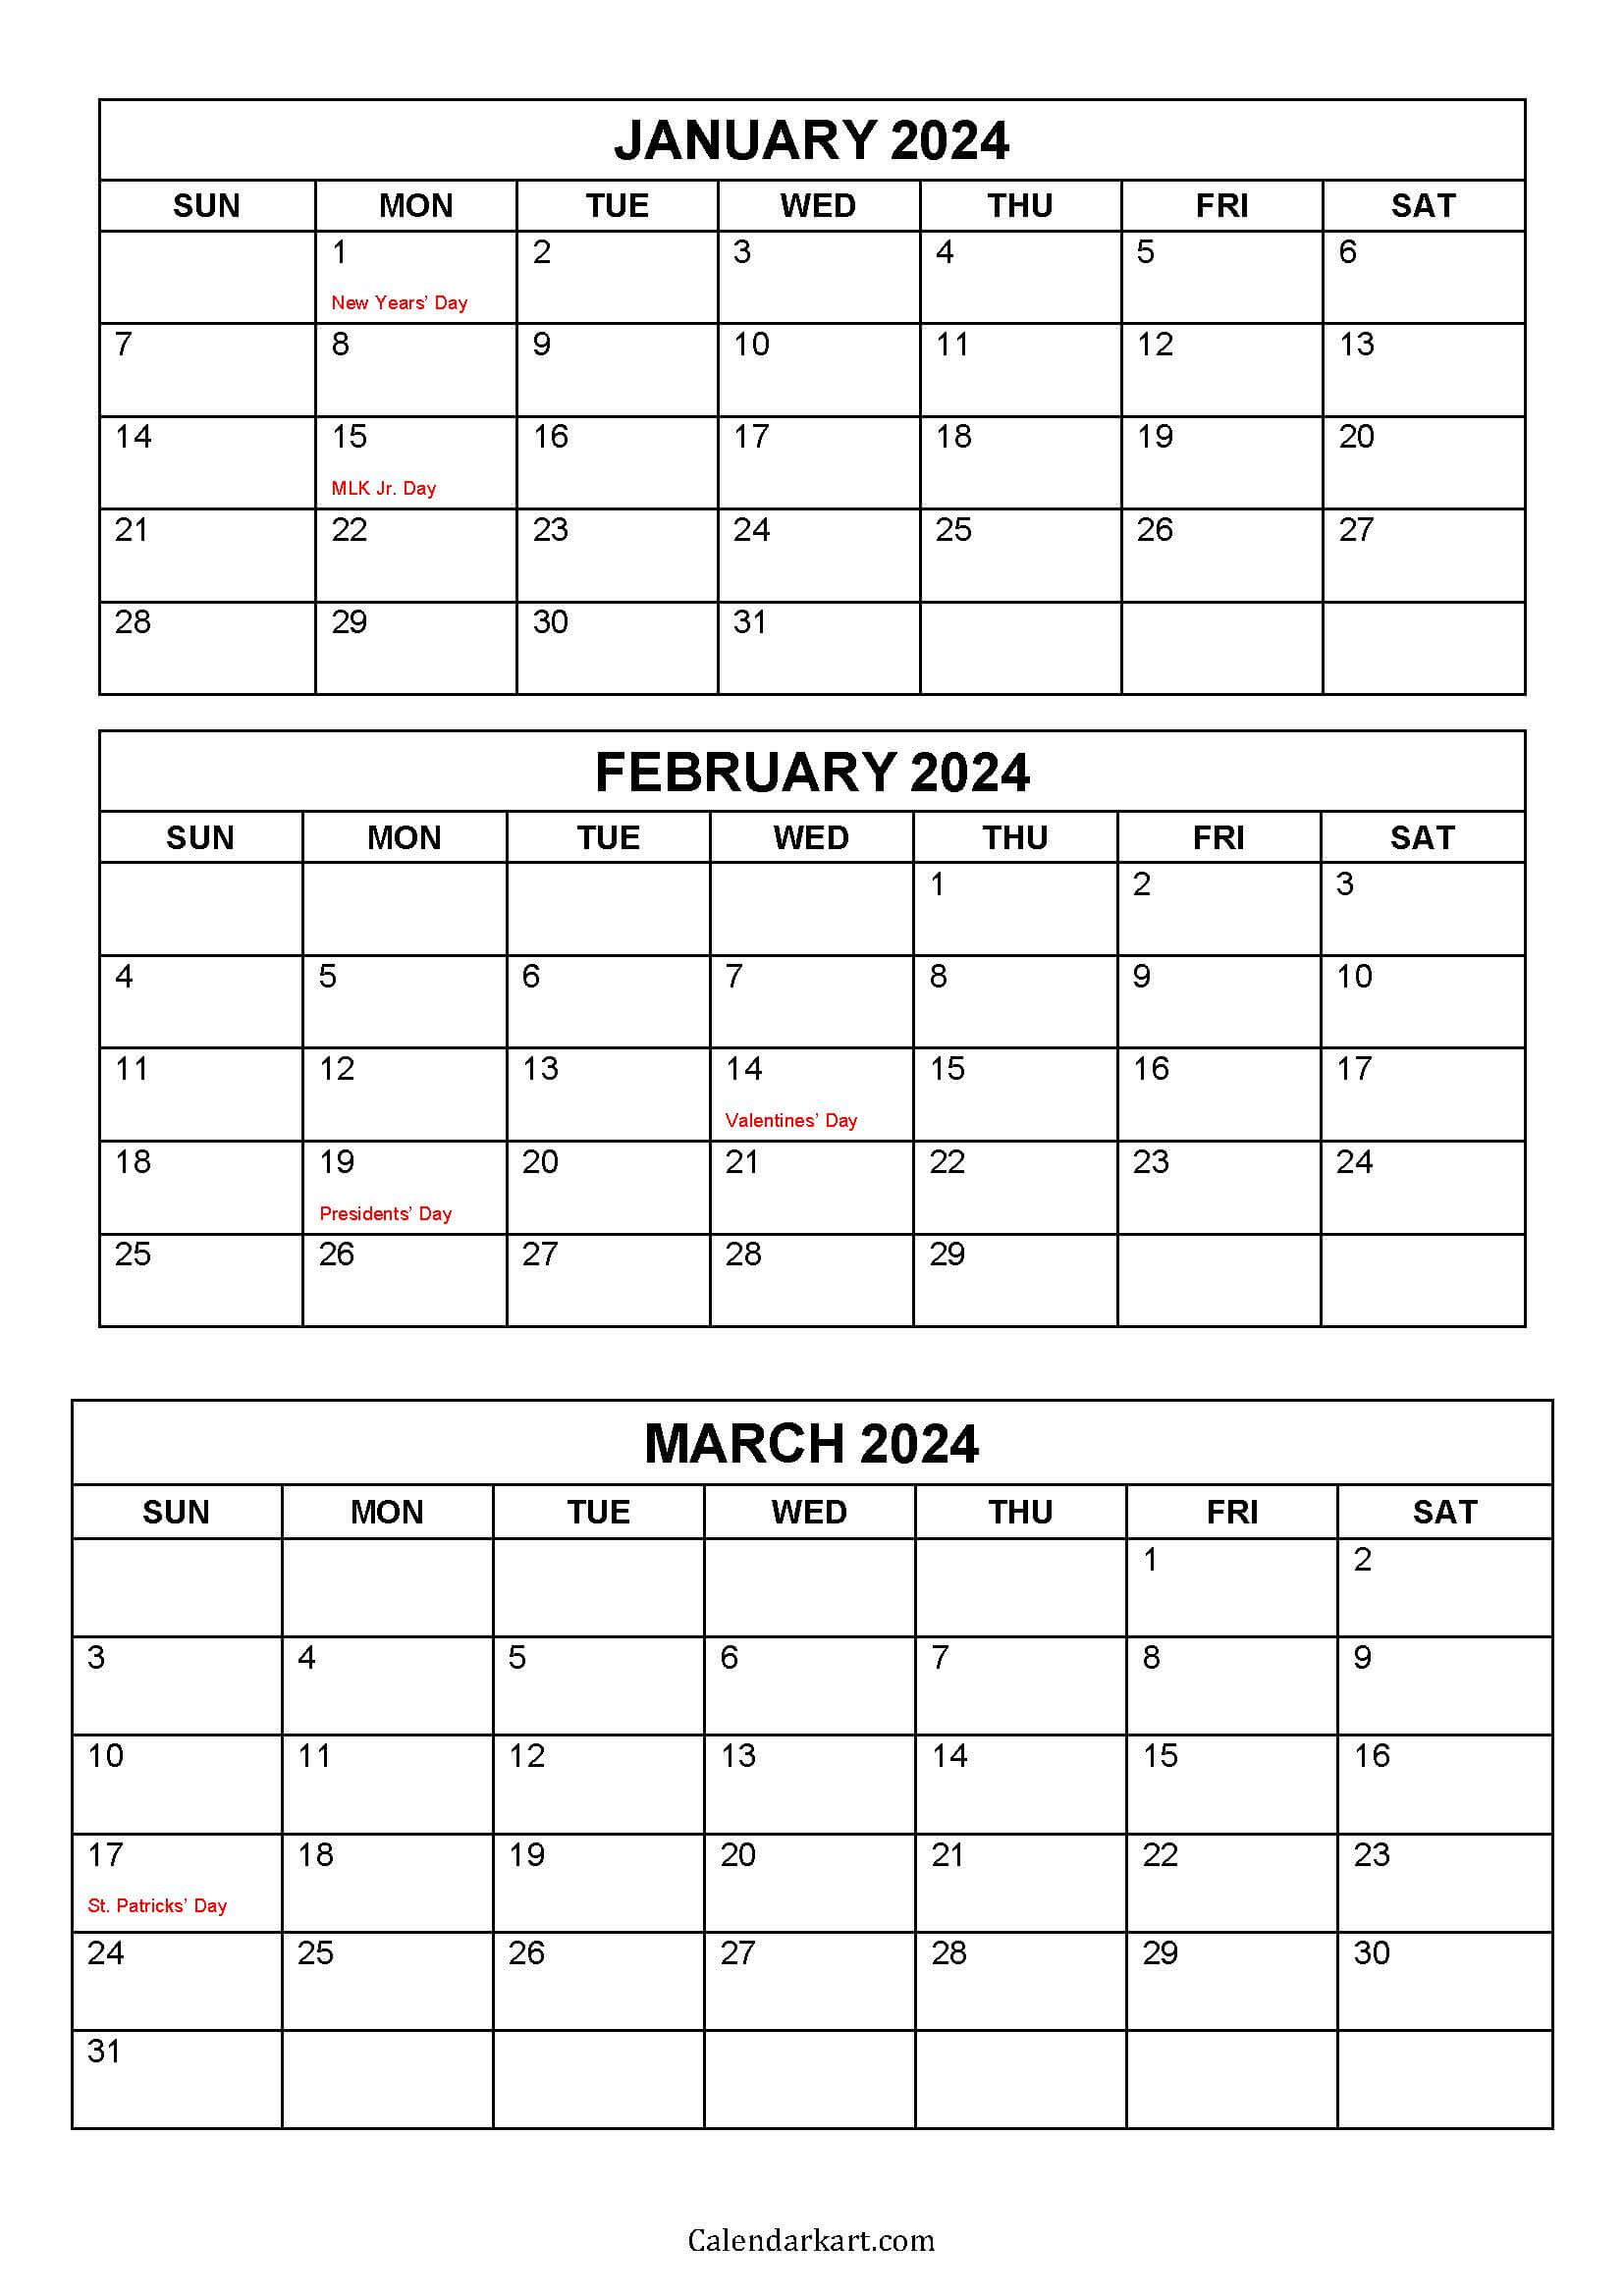 Free Printable January To March 2024 Calendar - Calendarkart | Printable Calendar 2024 January February March